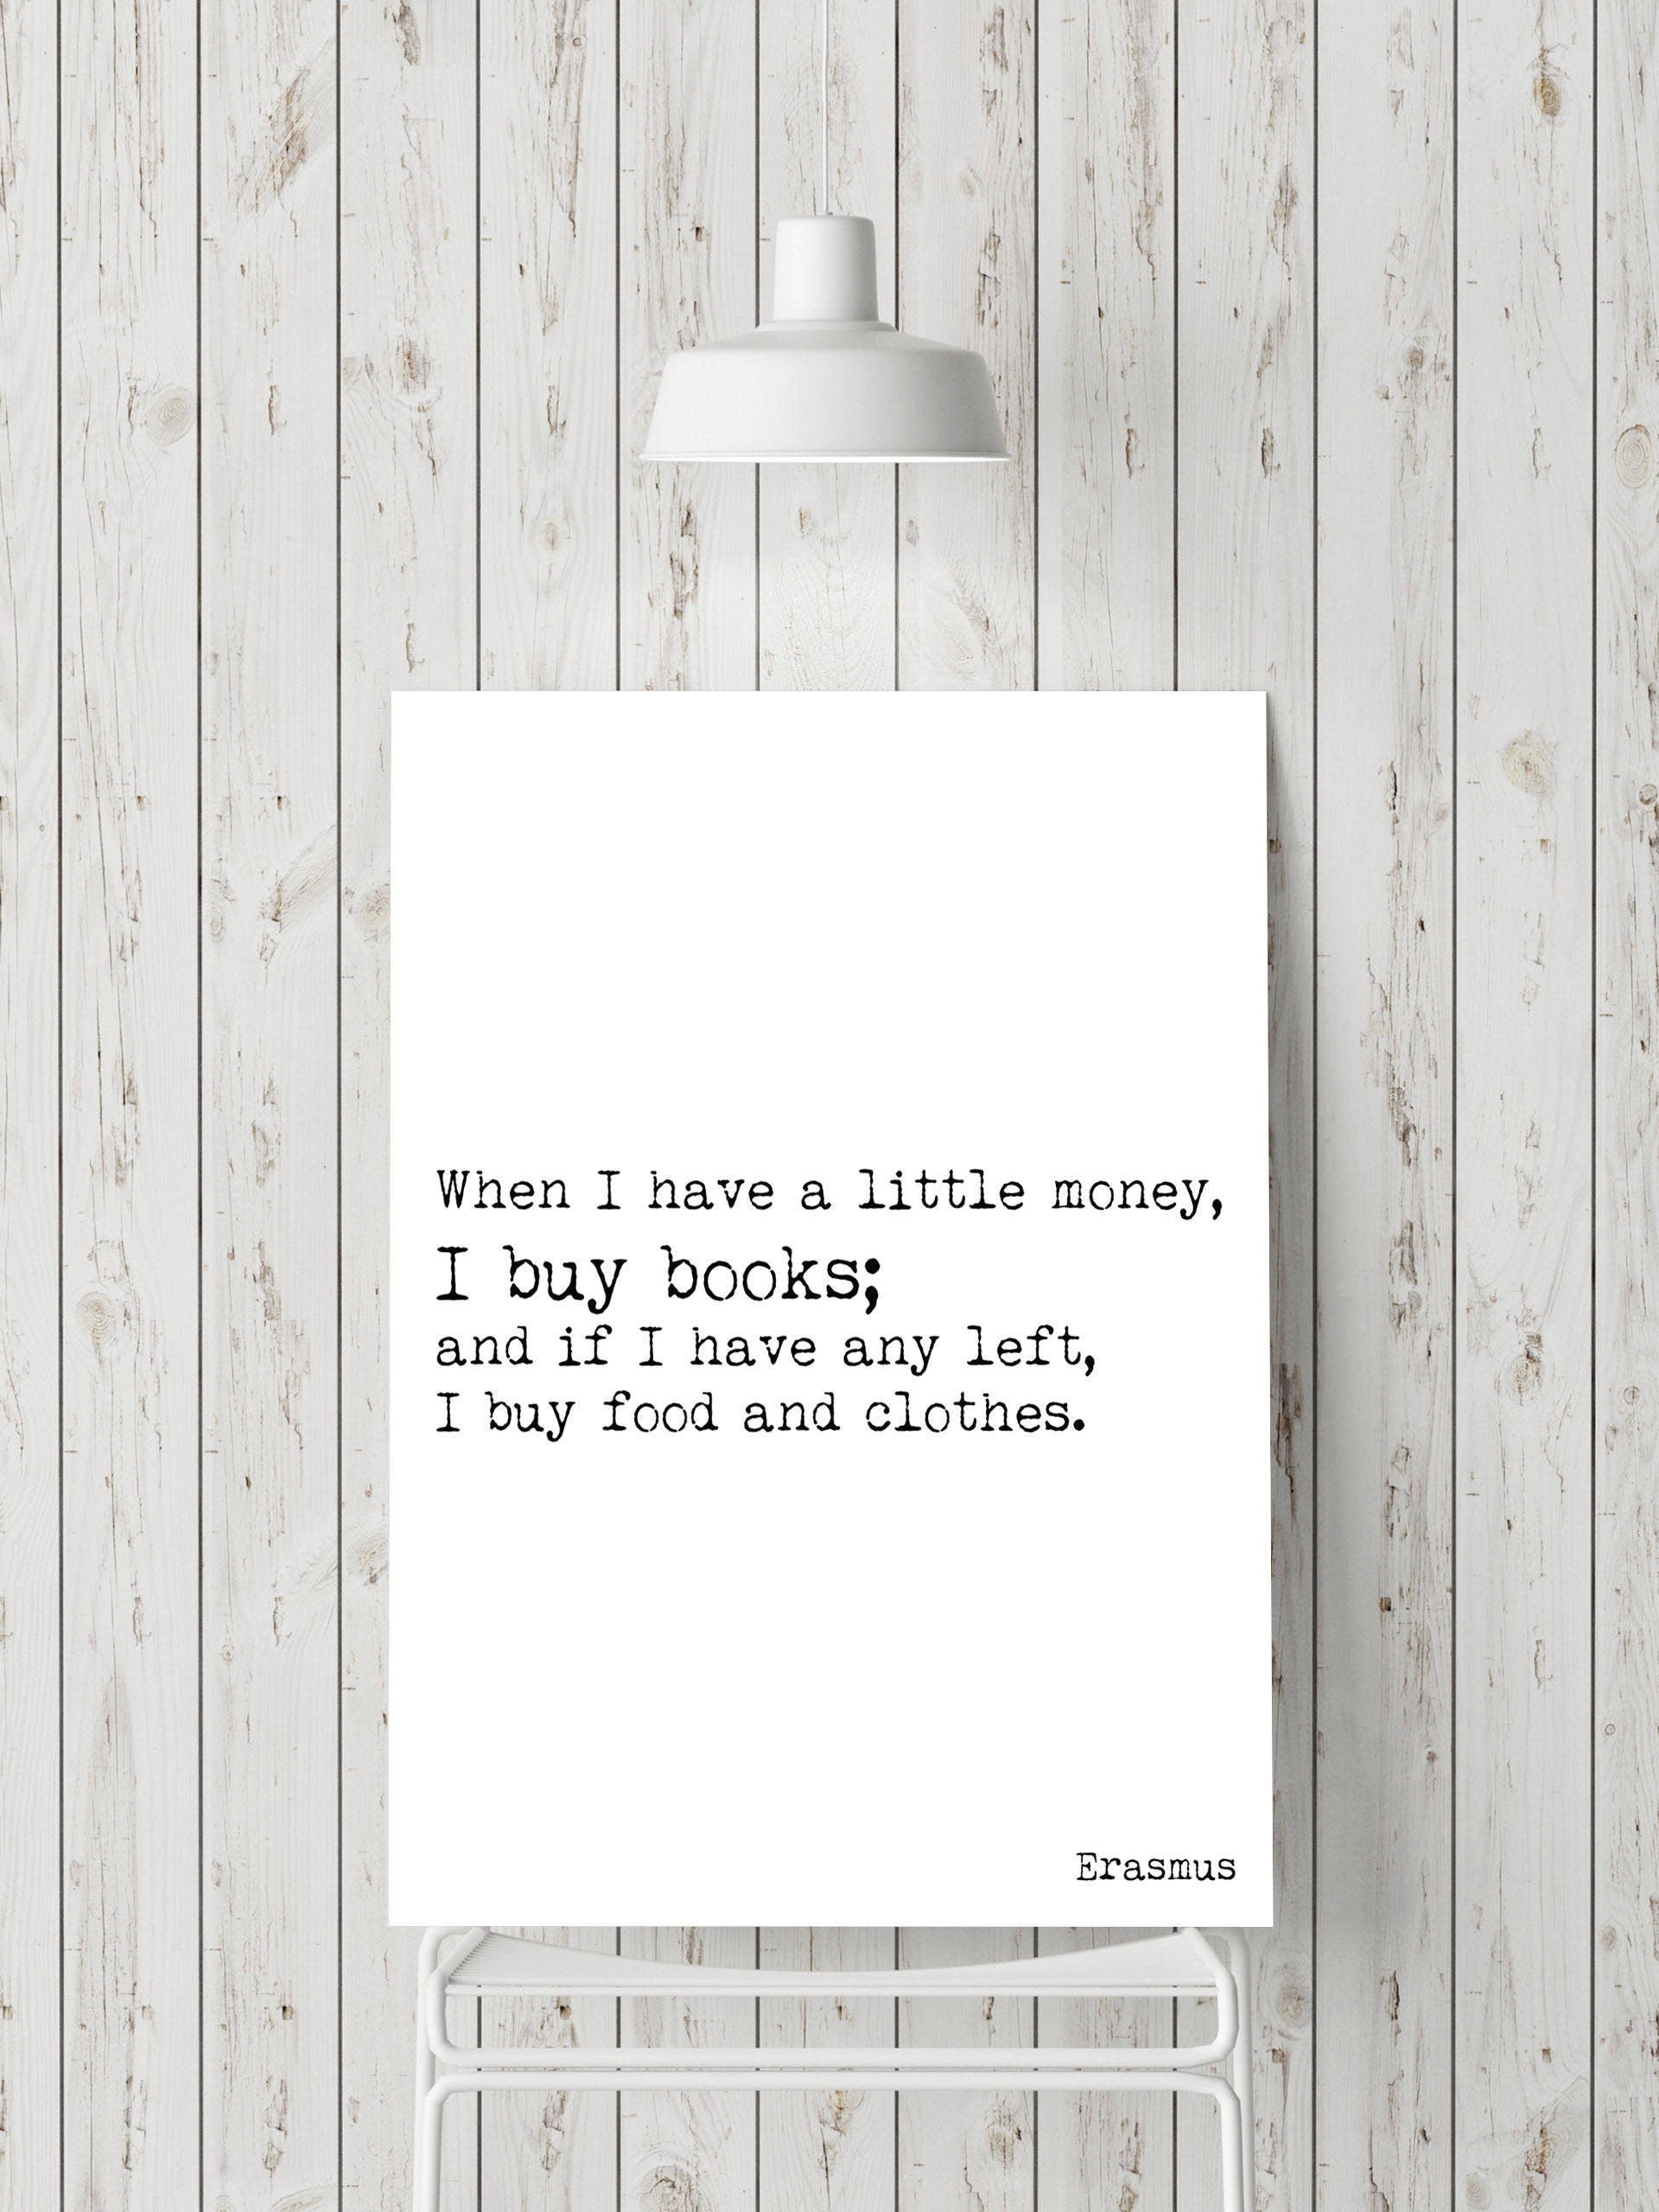 Book quote print, gift for book lover